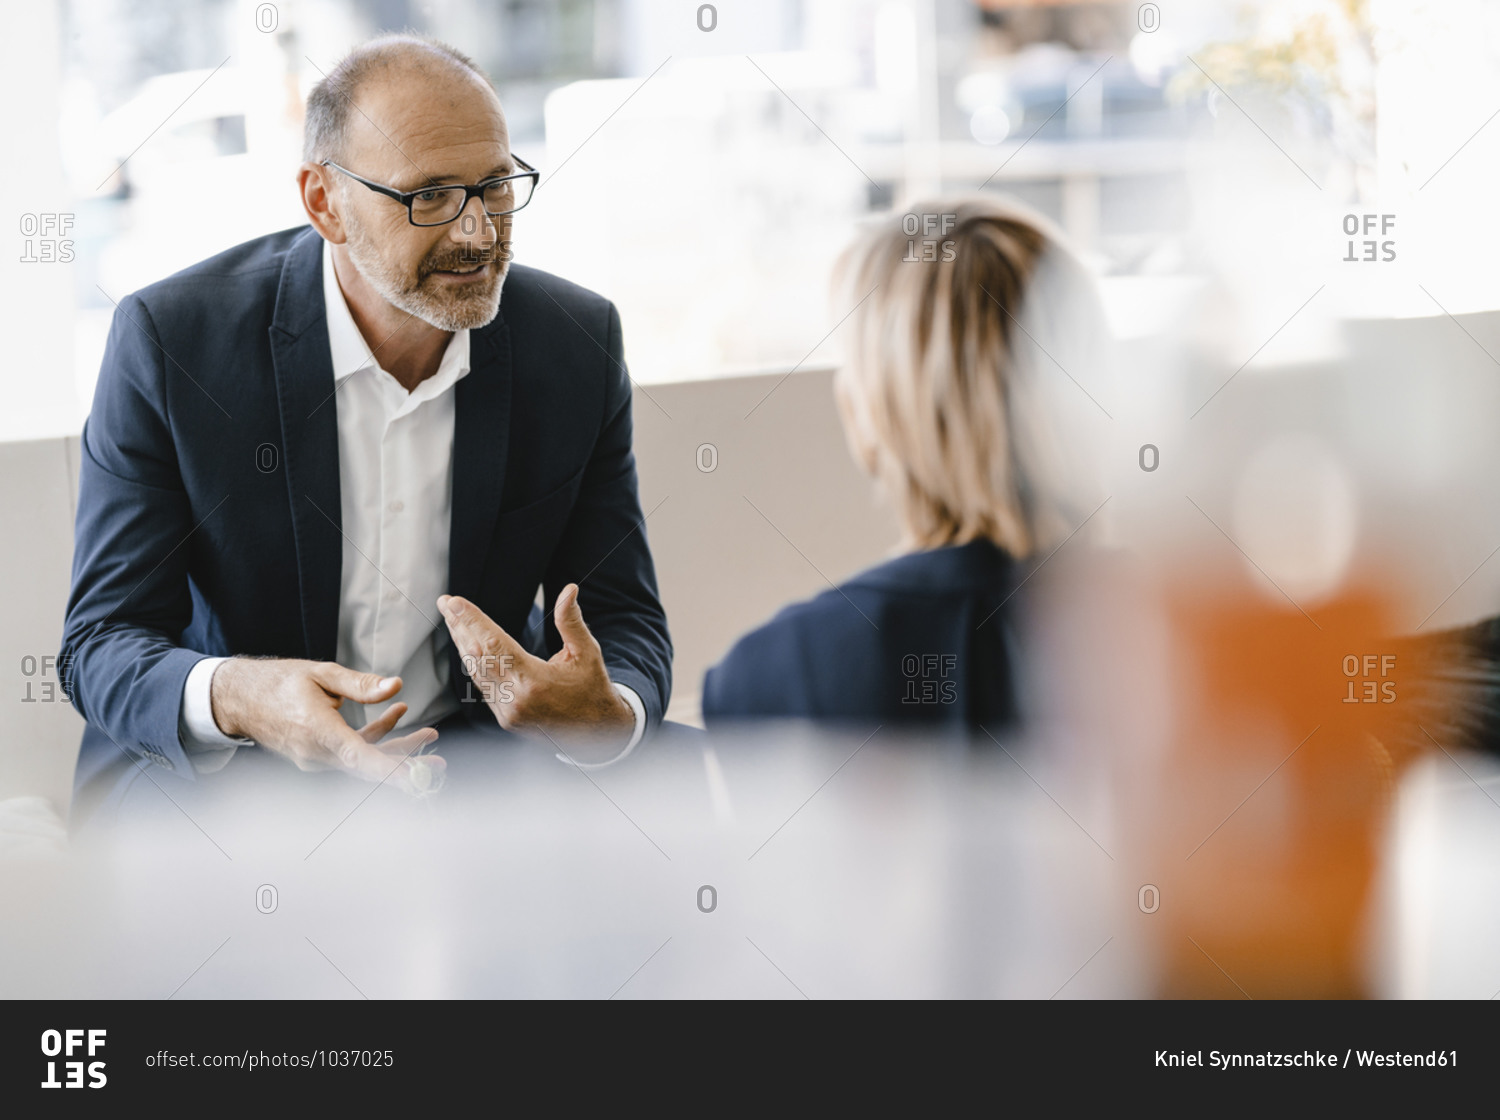 Businessman and woman having a meeting in a coffee shop- discussing work